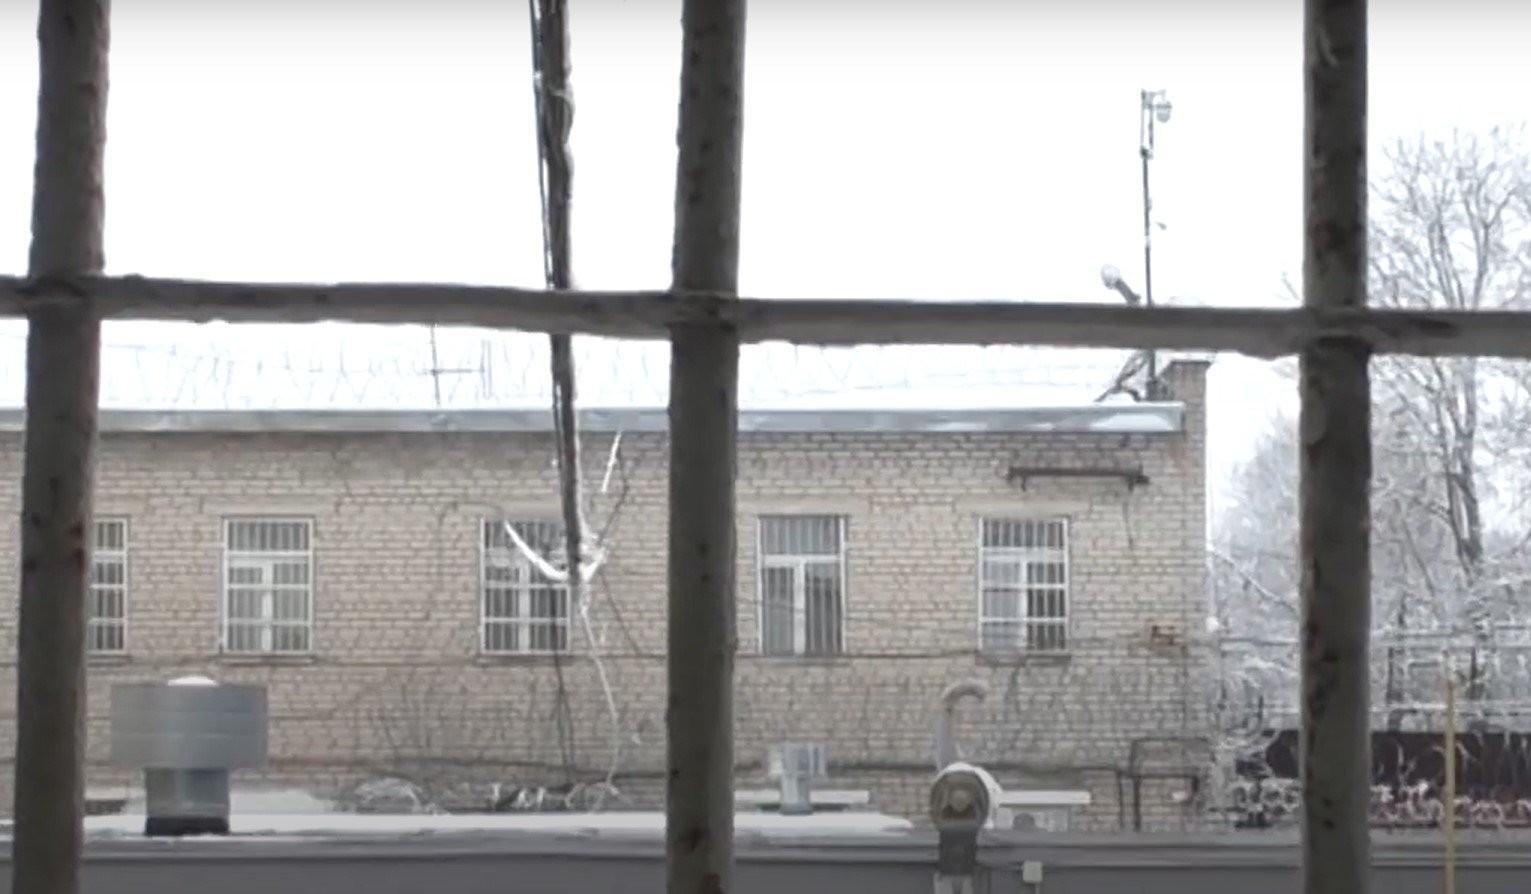 "Landscape" from the window of one of the cells of Vyazemsky Detention Center No. 2. Screenshot from a video by the Vyazemsky Information Center, prepared for the 85th anniversary of the detention center in 2020.